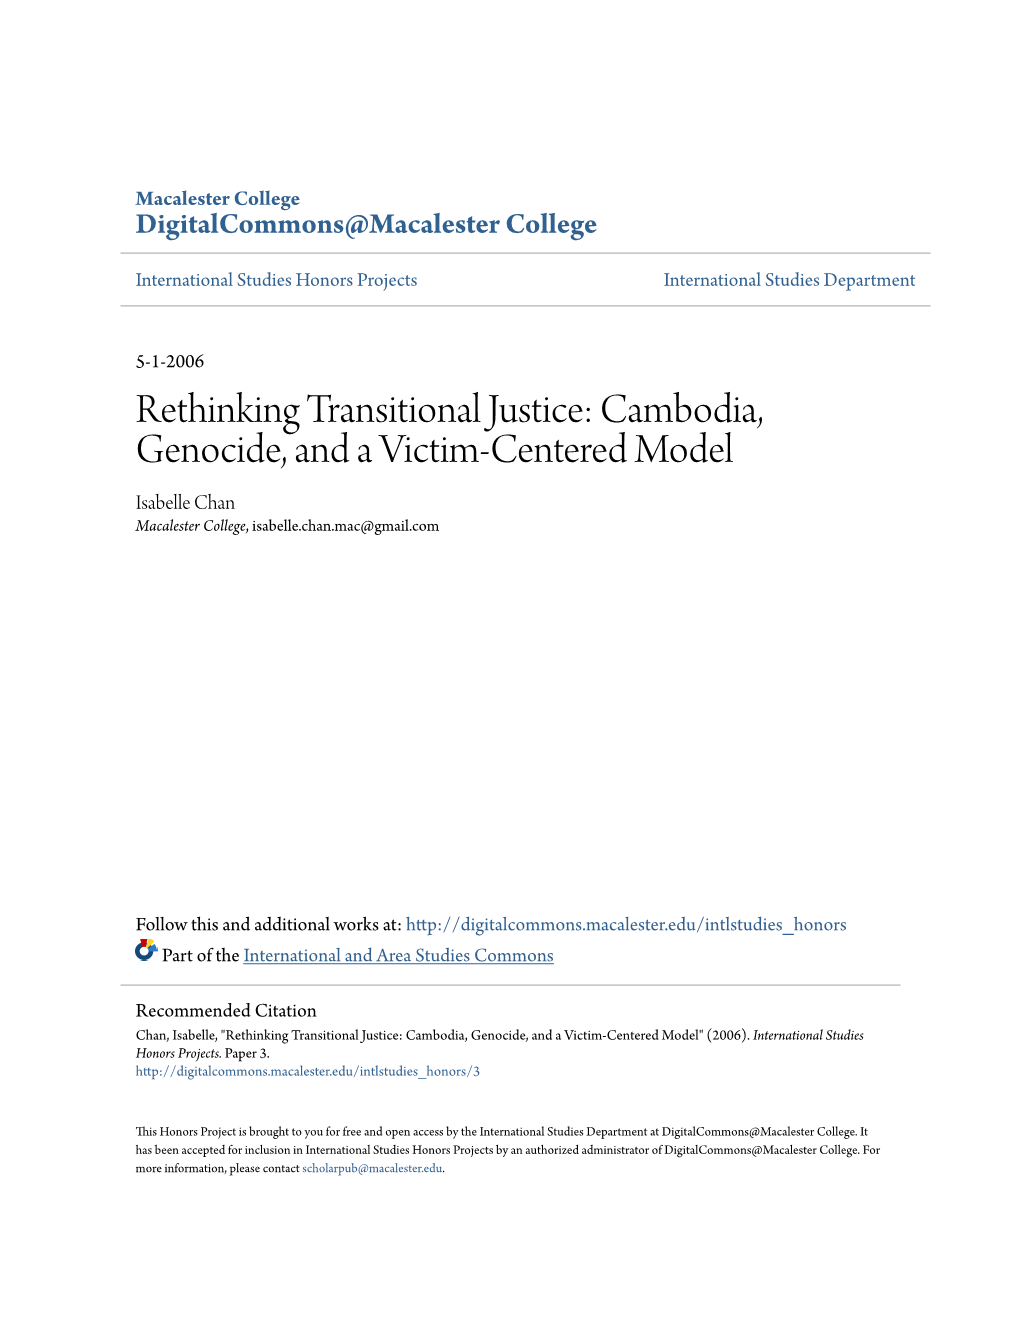 Rethinking Transitional Justice: Cambodia, Genocide, and a Victim-Centered Model Isabelle Chan Macalester College, Isabelle.Chan.Mac@Gmail.Com